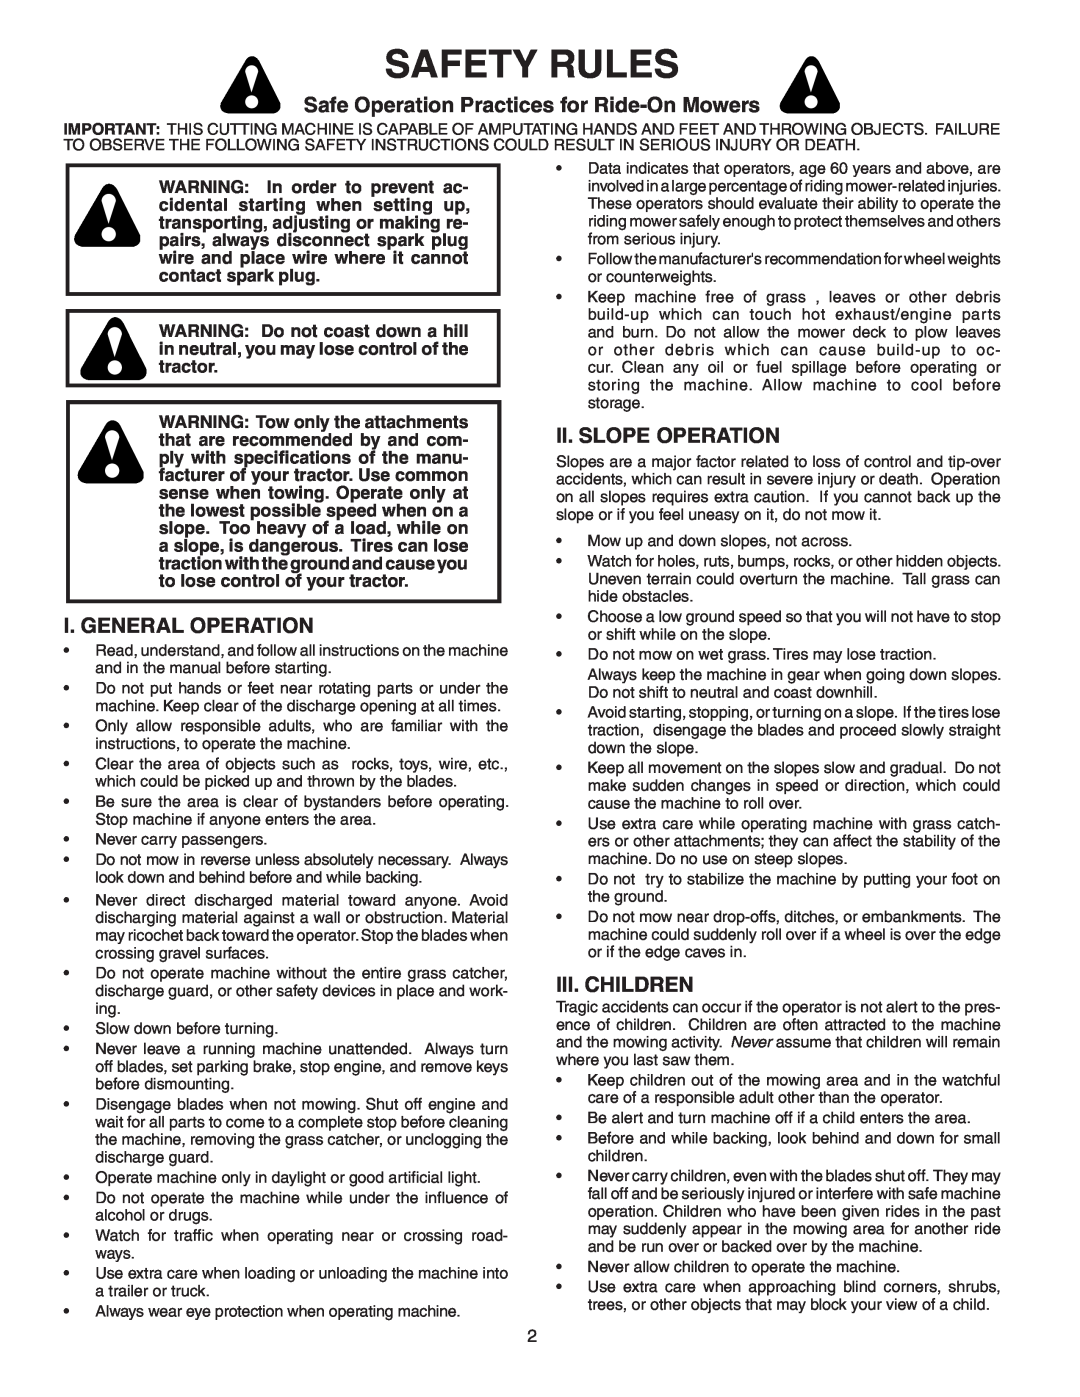 Poulan 960 72 00-09 Safety Rules, Safe Operation Practices for Ride-OnMowers, I. General Operation, Ii. Slope Operation 